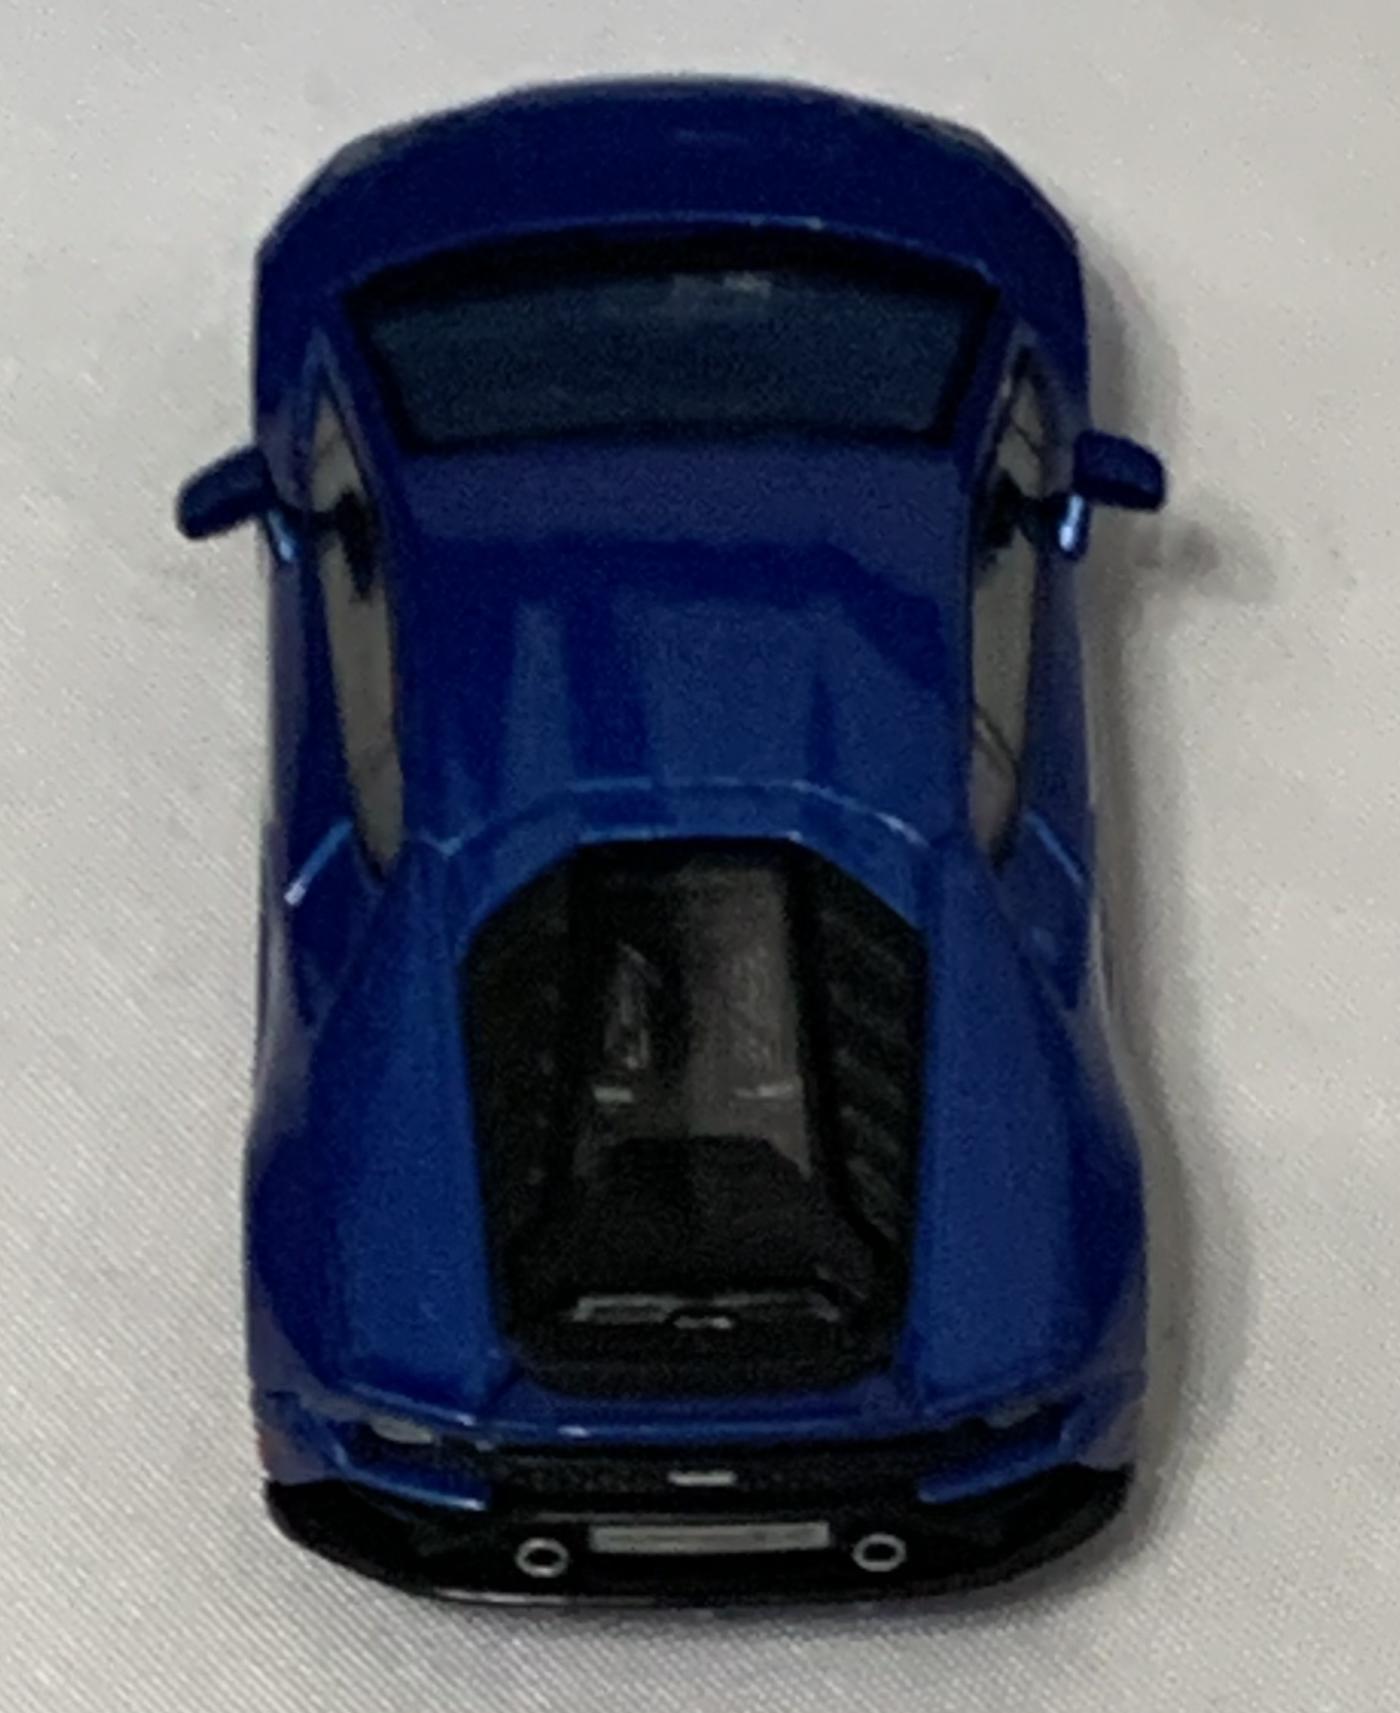 An excellent scale model of a Lamborghini Huracan EVO decorated in blue eleos with silver wheels